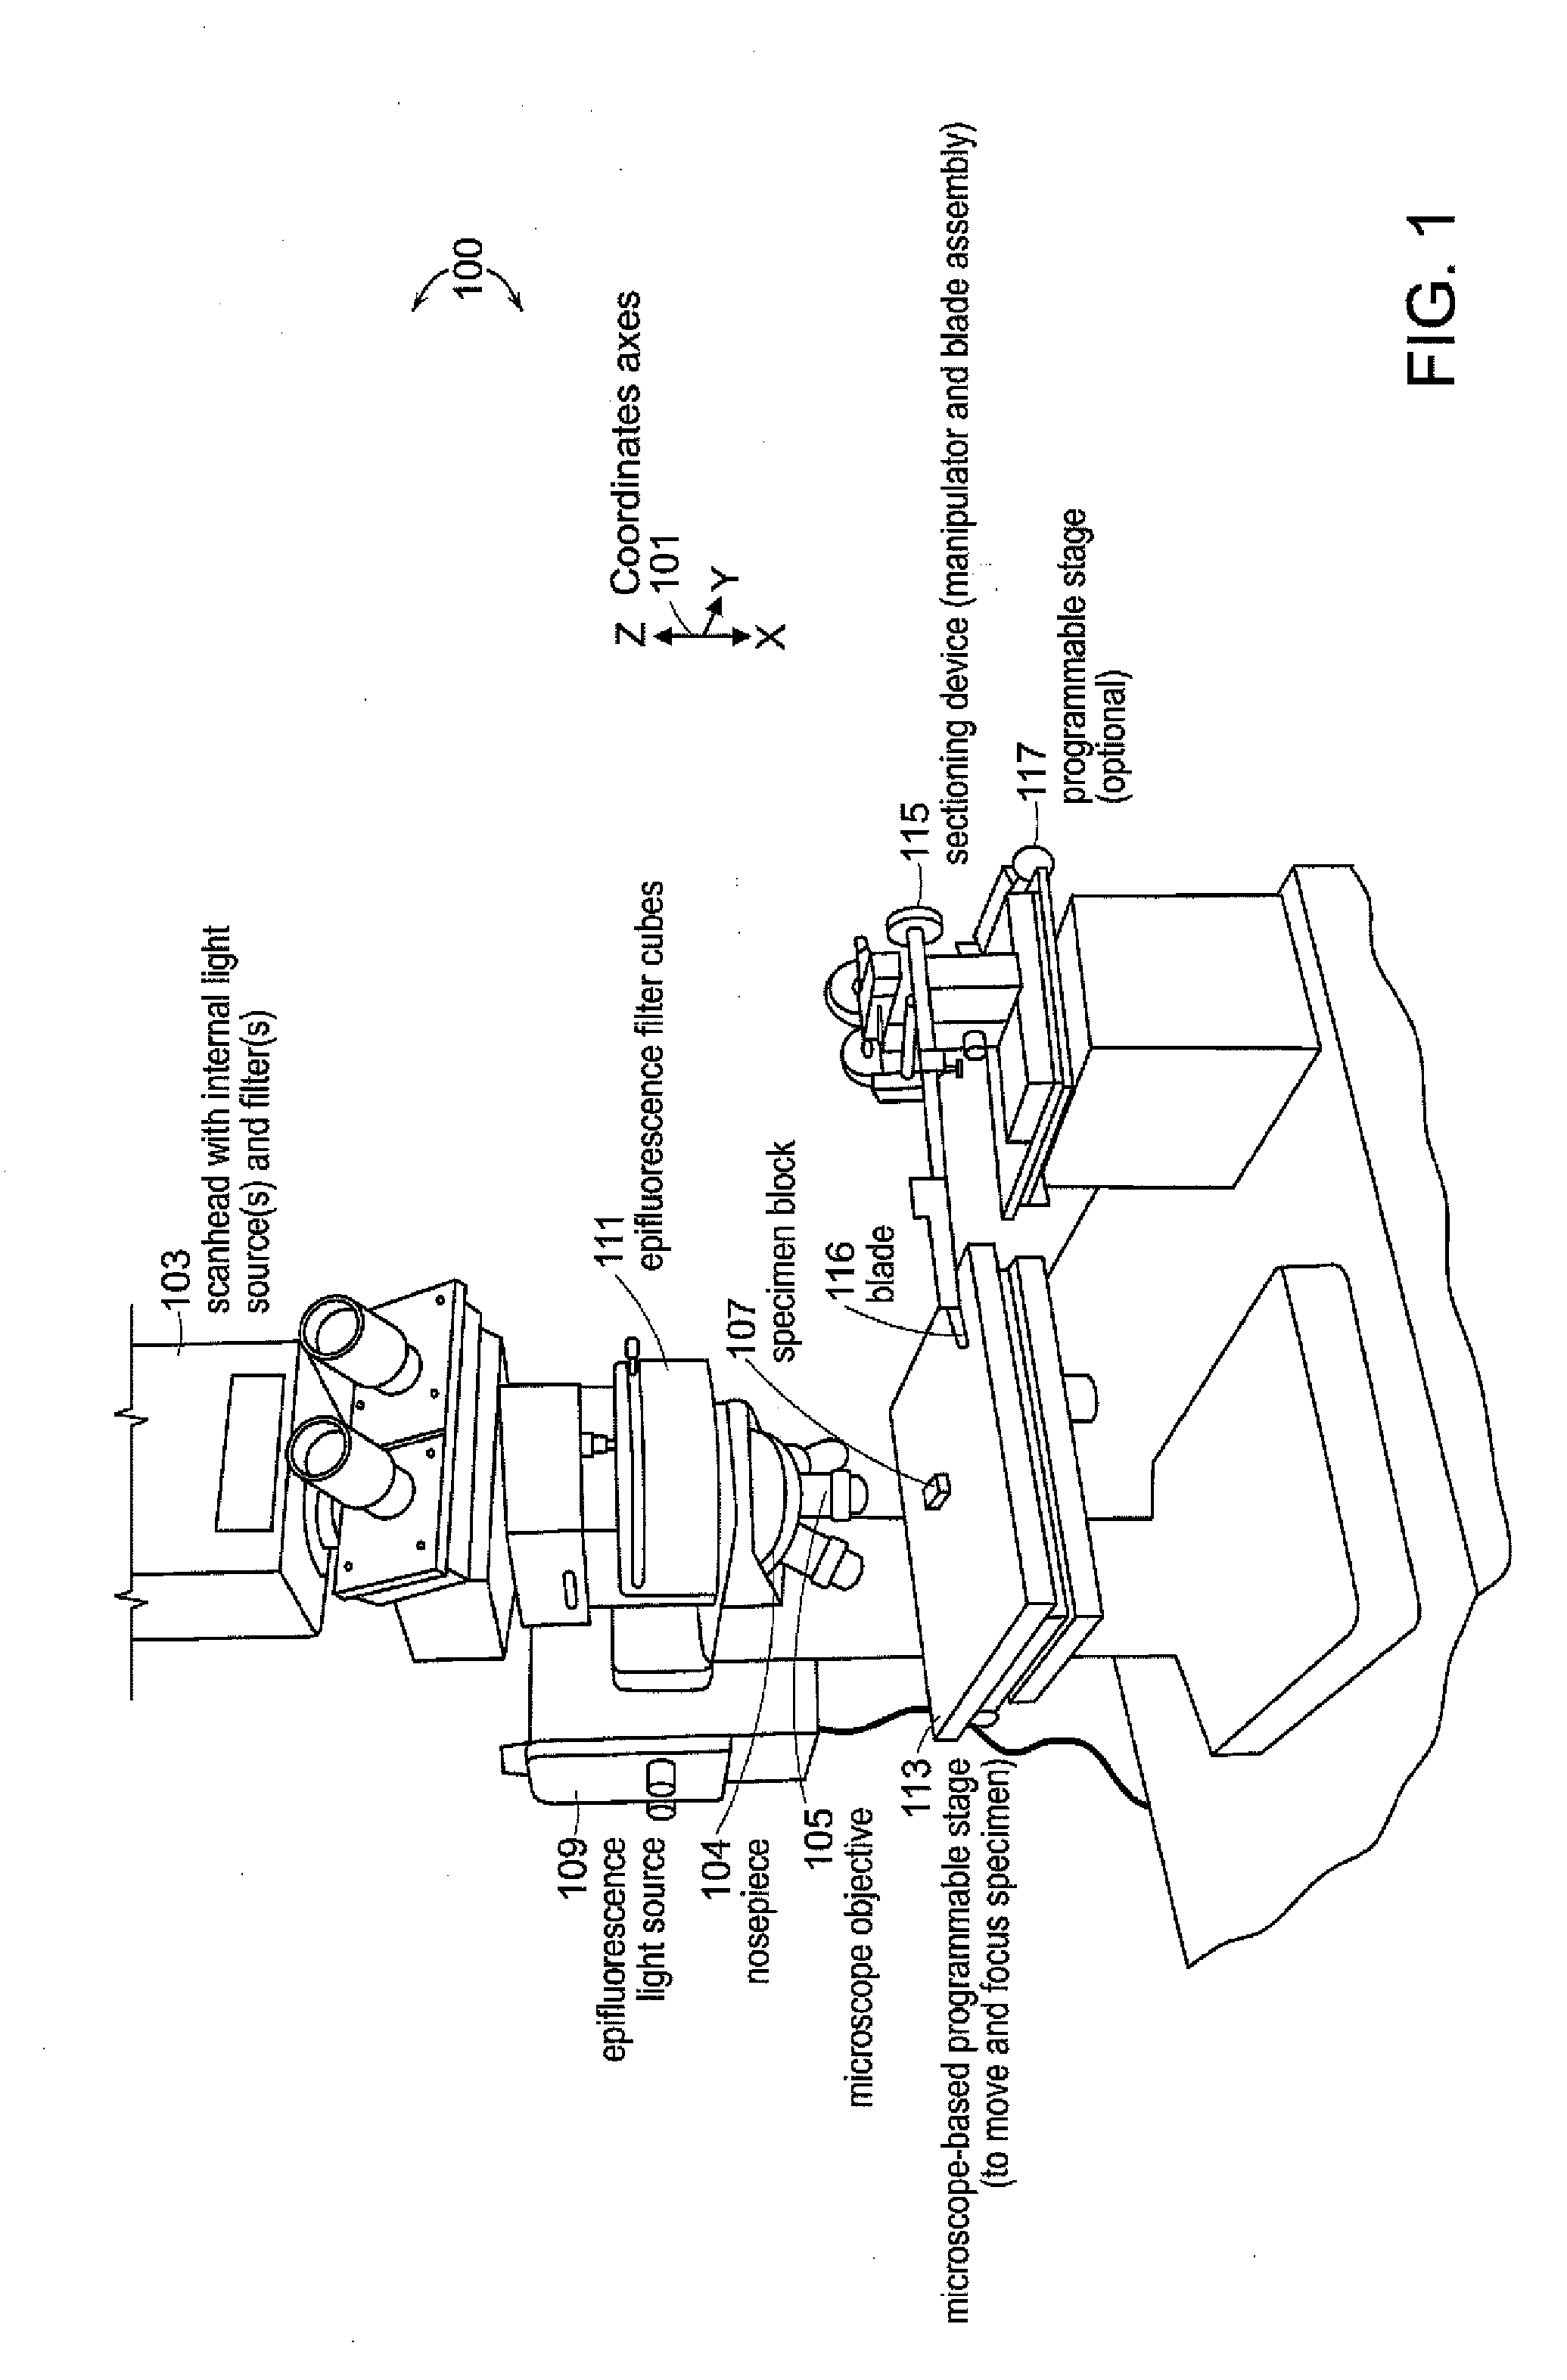 System and methods for thick specimen imaging using a microscope based tissue sectioning device